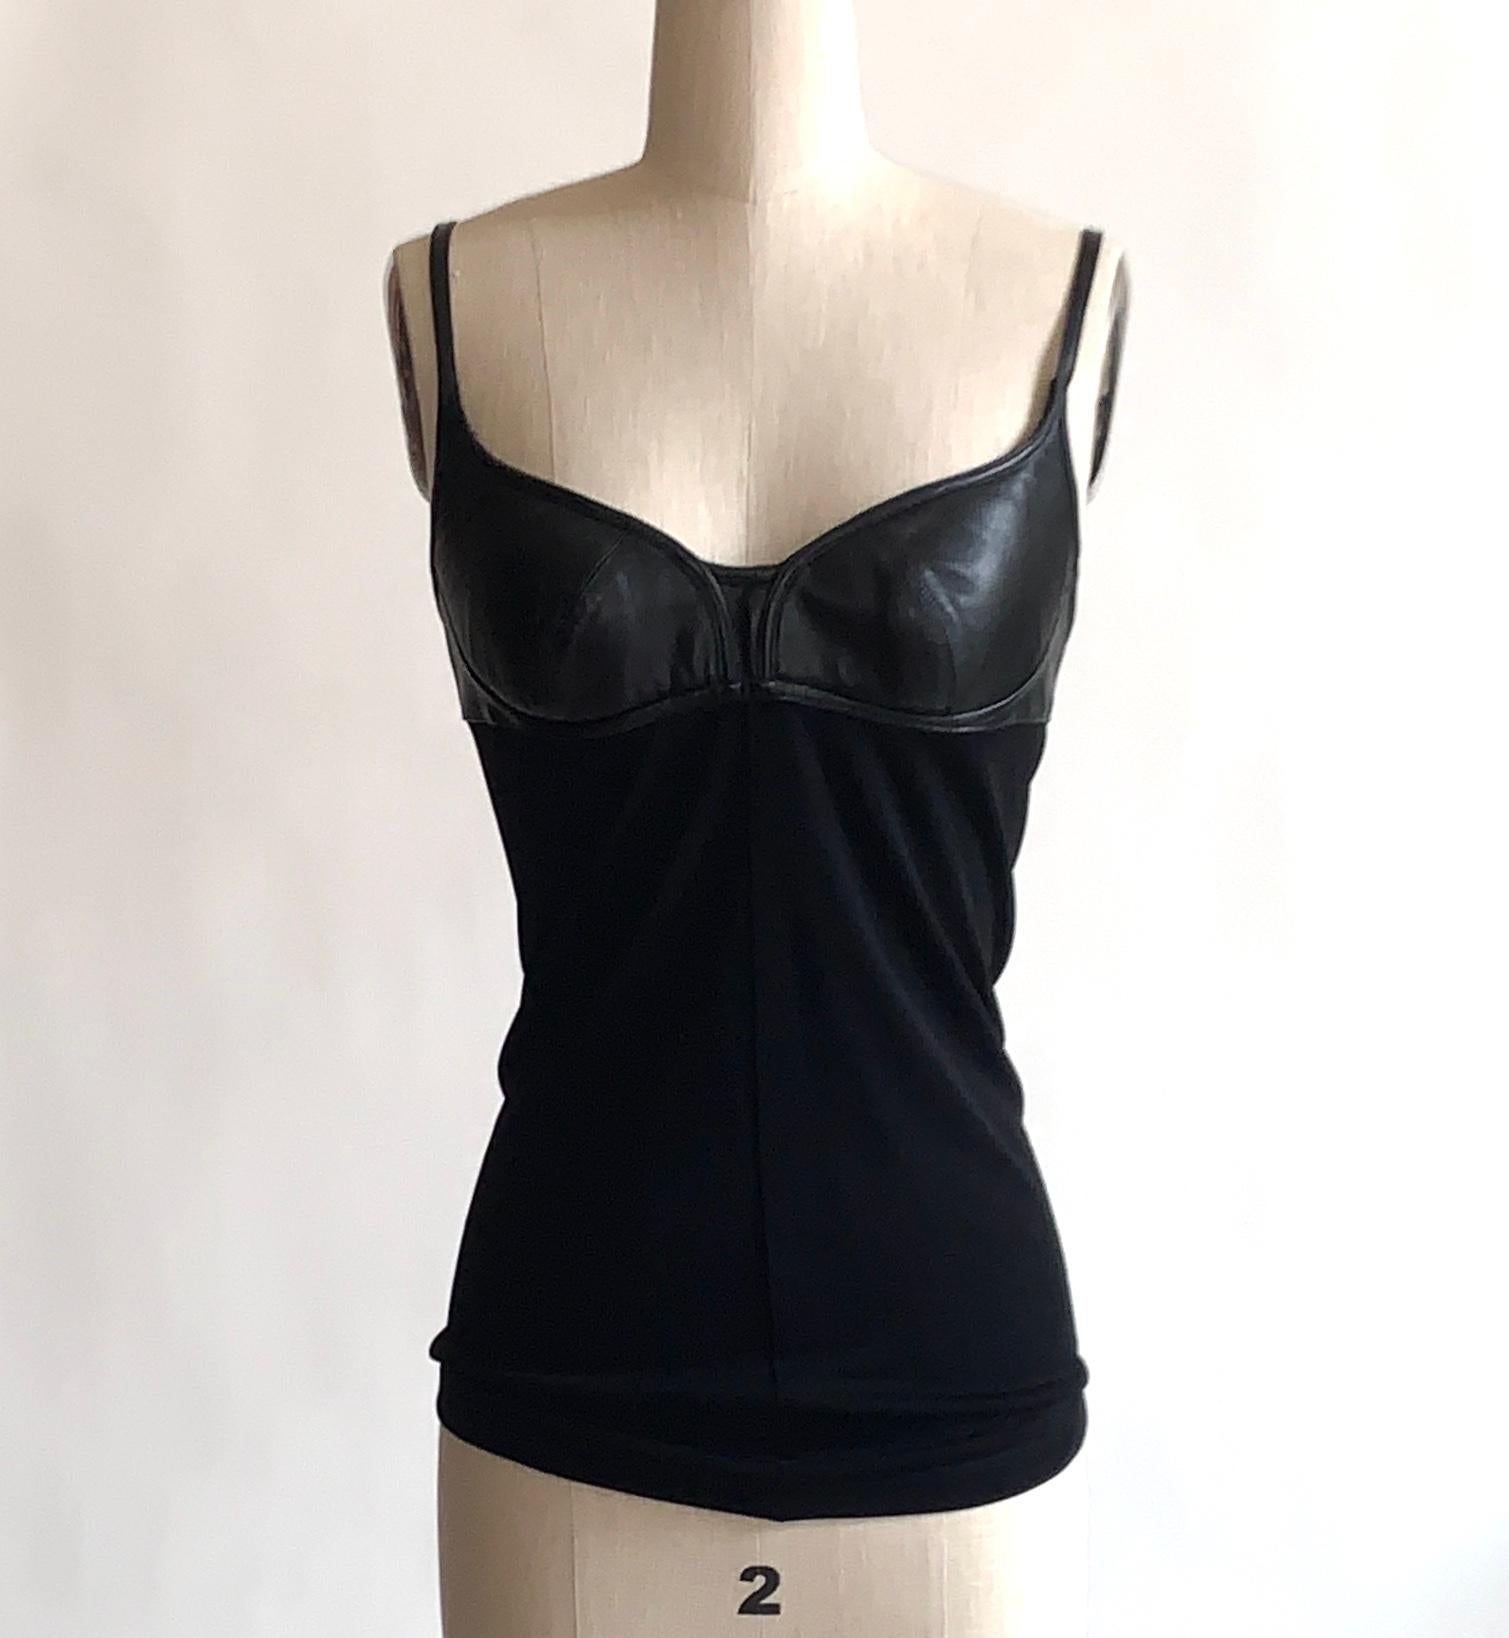 Alexander McQueen black tank with leather detailing at bust and leather straps. Center seams. Back zip and hook and eye. 

90% viscose, 10% leather.

Size IT 42, approximate US 4/6. See measurements.
Bust (underarm to underarm) 31